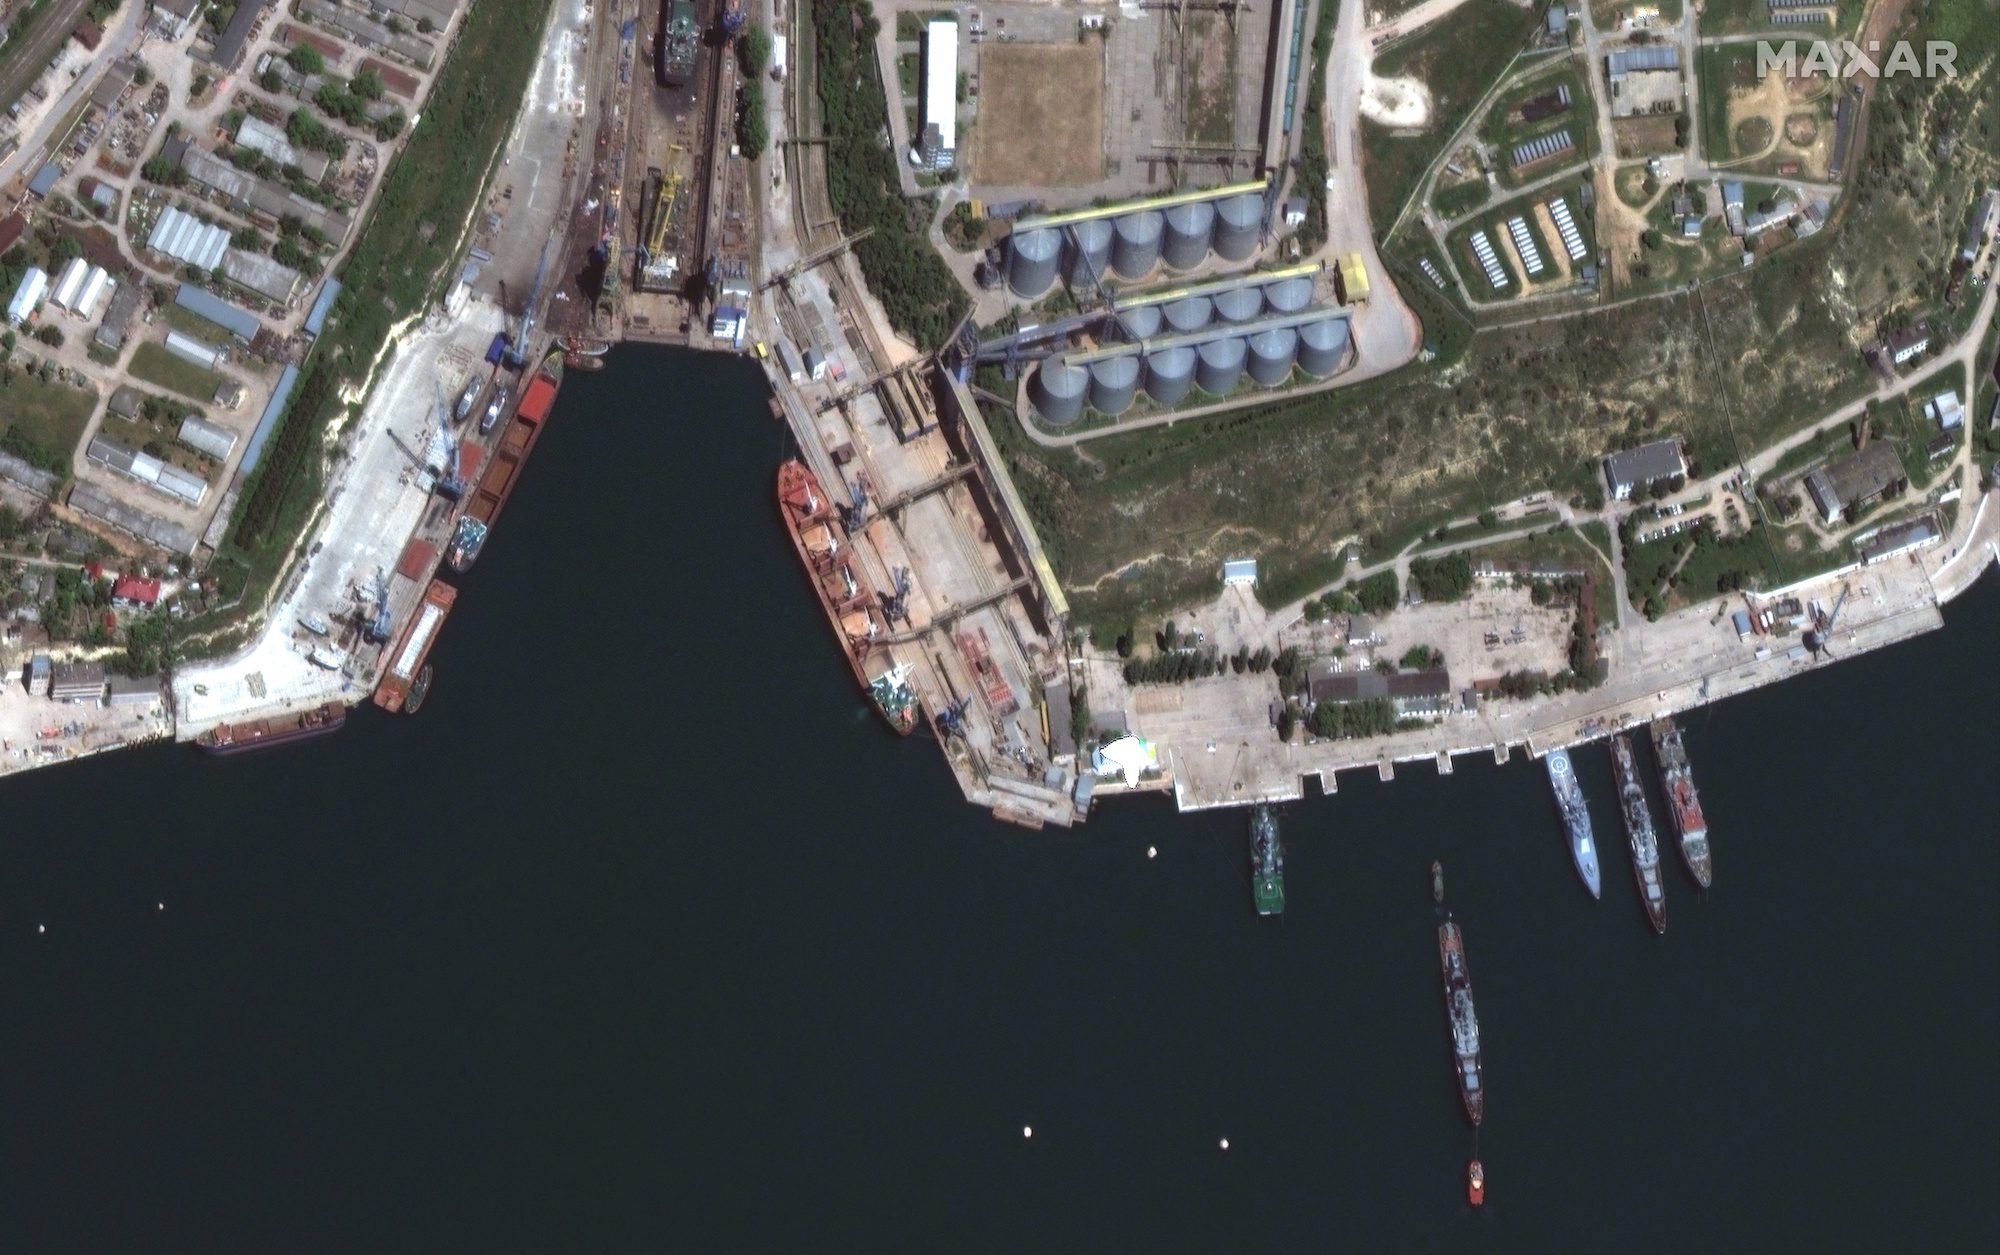 Russia Blames Ukraine: “They Mined the Ports, Not Us”